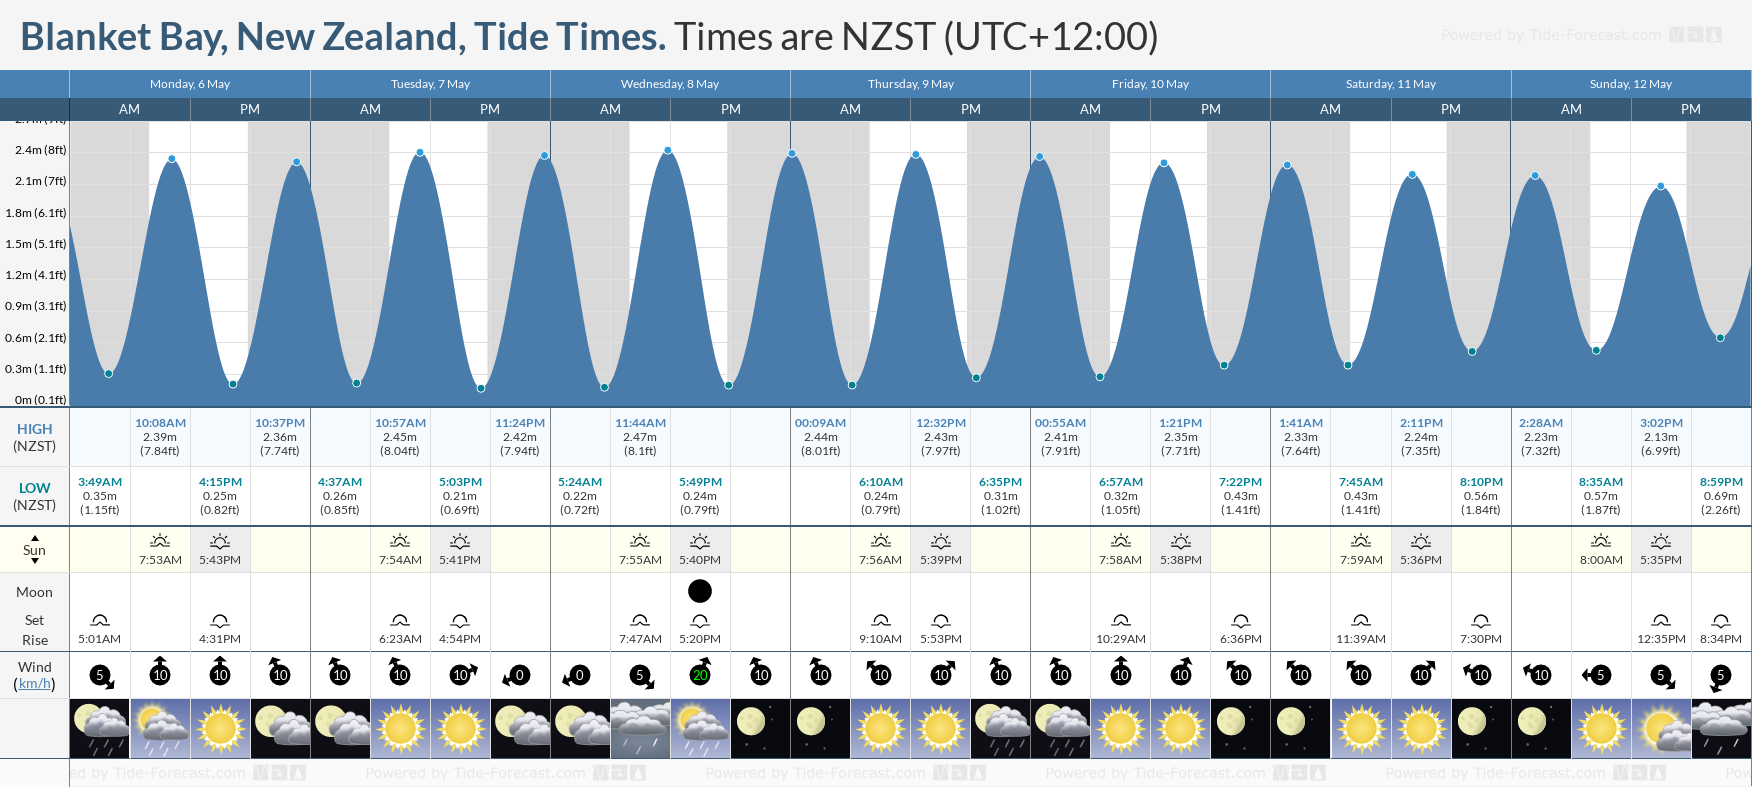 Blanket Bay, New Zealand Tide Chart including high and low tide tide times for the next 7 days